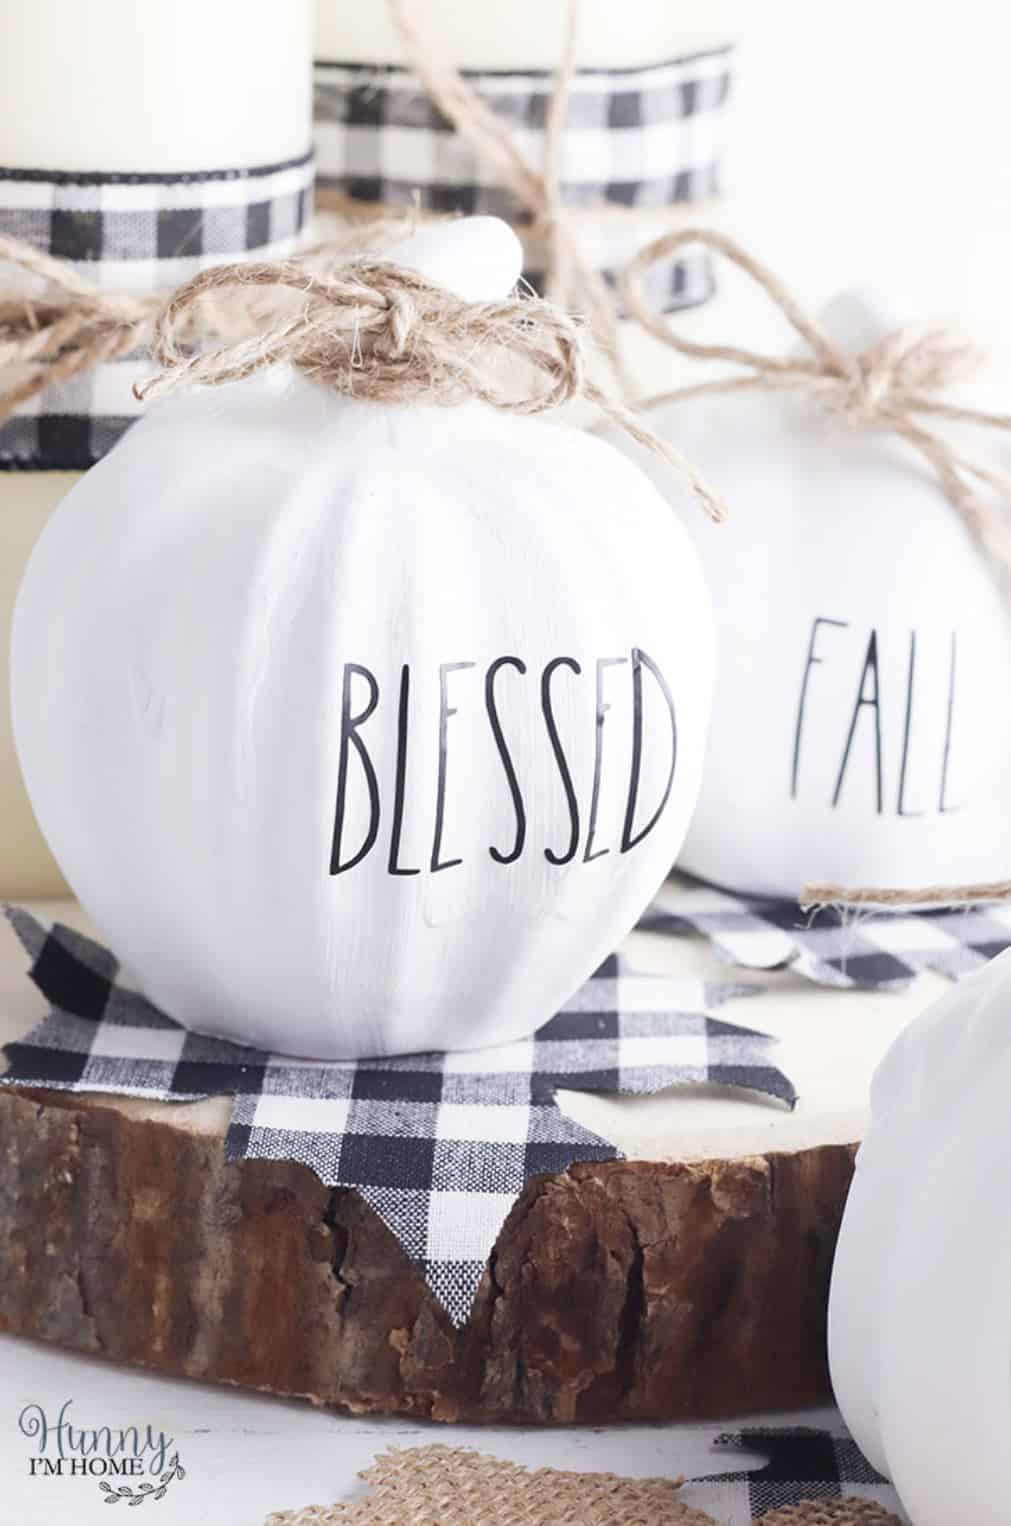 Decorative pumpkins painted white with letters added reading, "Blessed", and "Fall".